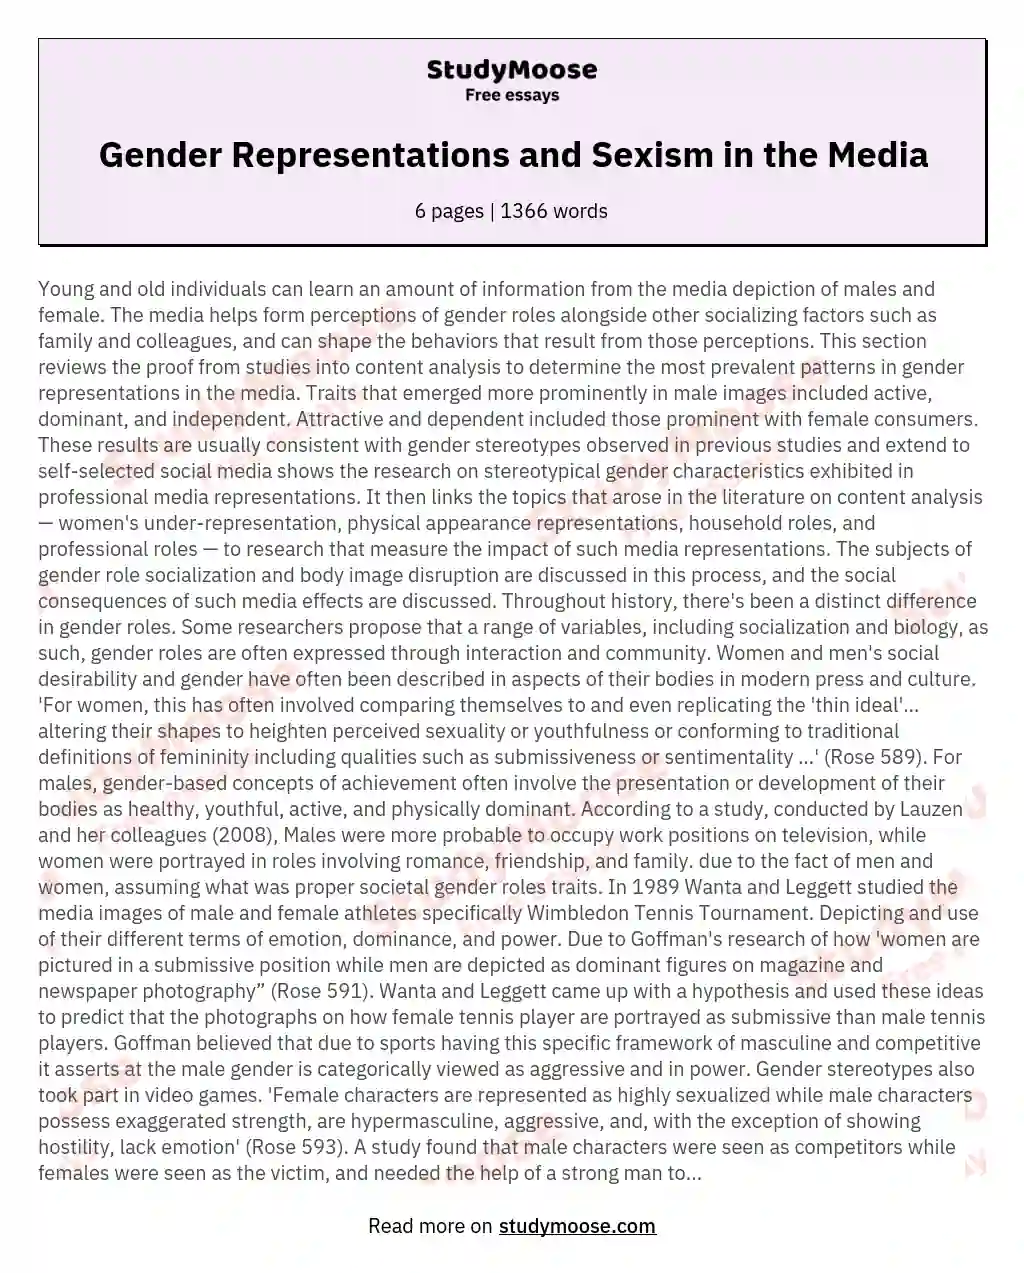 Gender Representations and Sexism in the Media